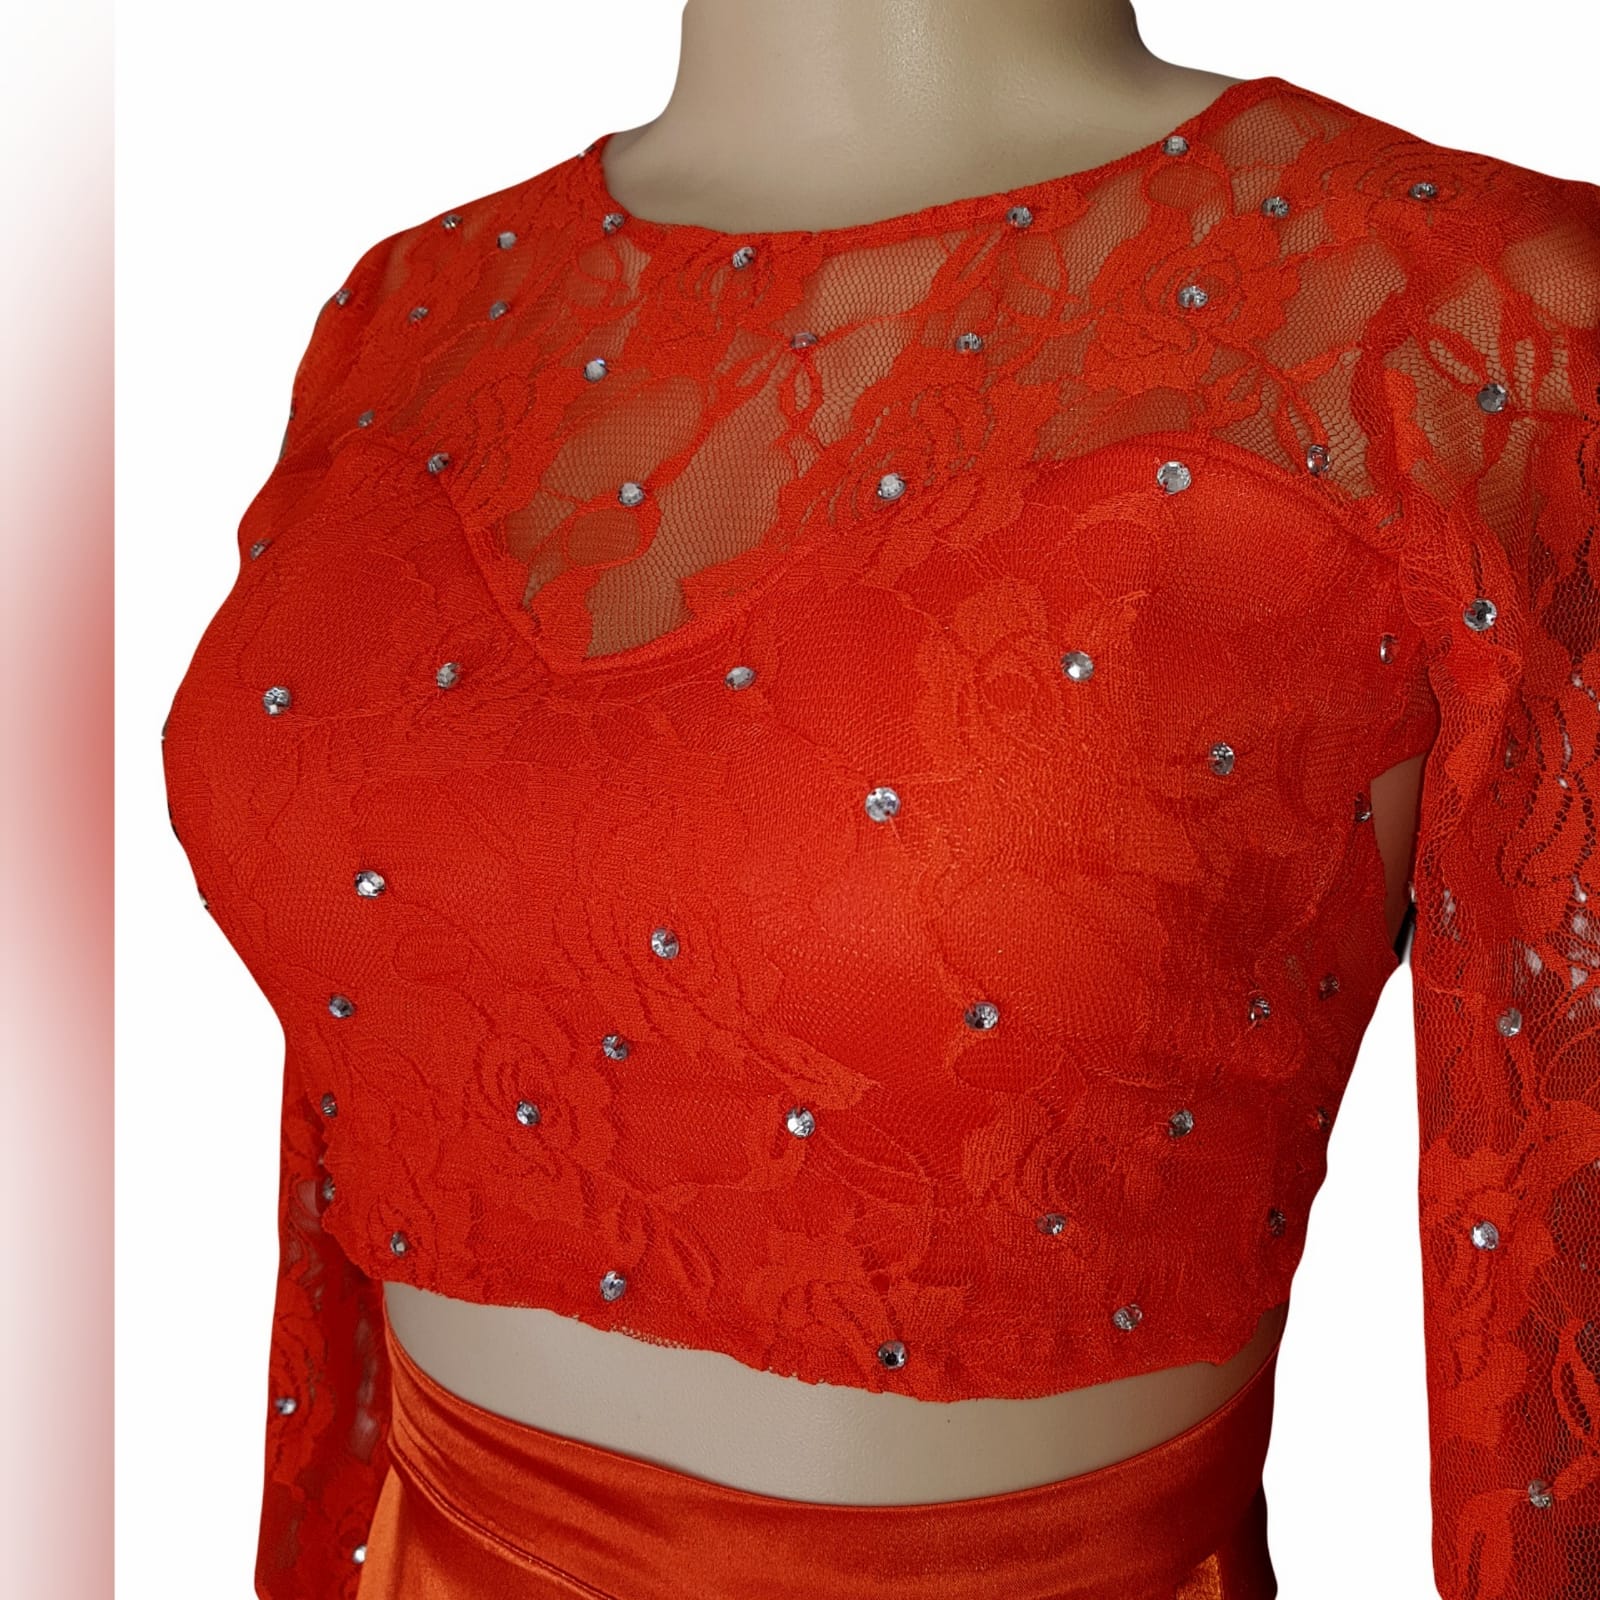 2 piece orange prom dress with a lace crop top 6 2 piece orange prom dress with a lace crop top detailed with silver beads. Flowy, shiny skirt with crossed slit and long train.